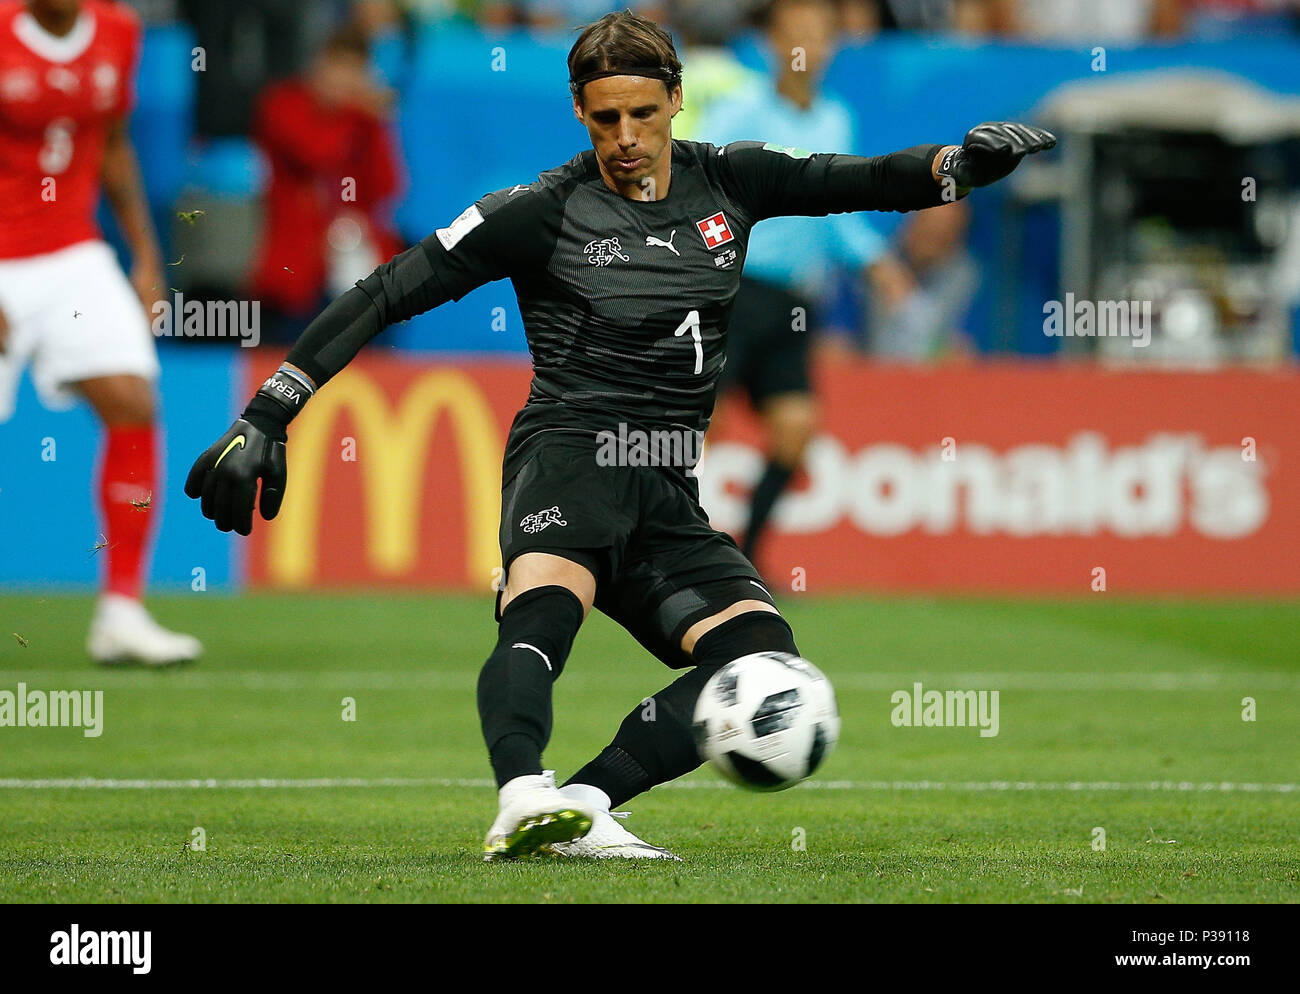 Rostov, Russia. 17th June, 2018. BRAZIL VS SWITZERLAND - Yann Sommer of Switzerland during a match between Brazil and Switzerland valid for the first round of Group E of the 2018 World Cup held at the Rostov Arena in Rostov on Don, Russia. (Photo: Marcelo Machado de Melo/Fotoarena) Credit: Foto Arena LTDA/Alamy Live News Stock Photo